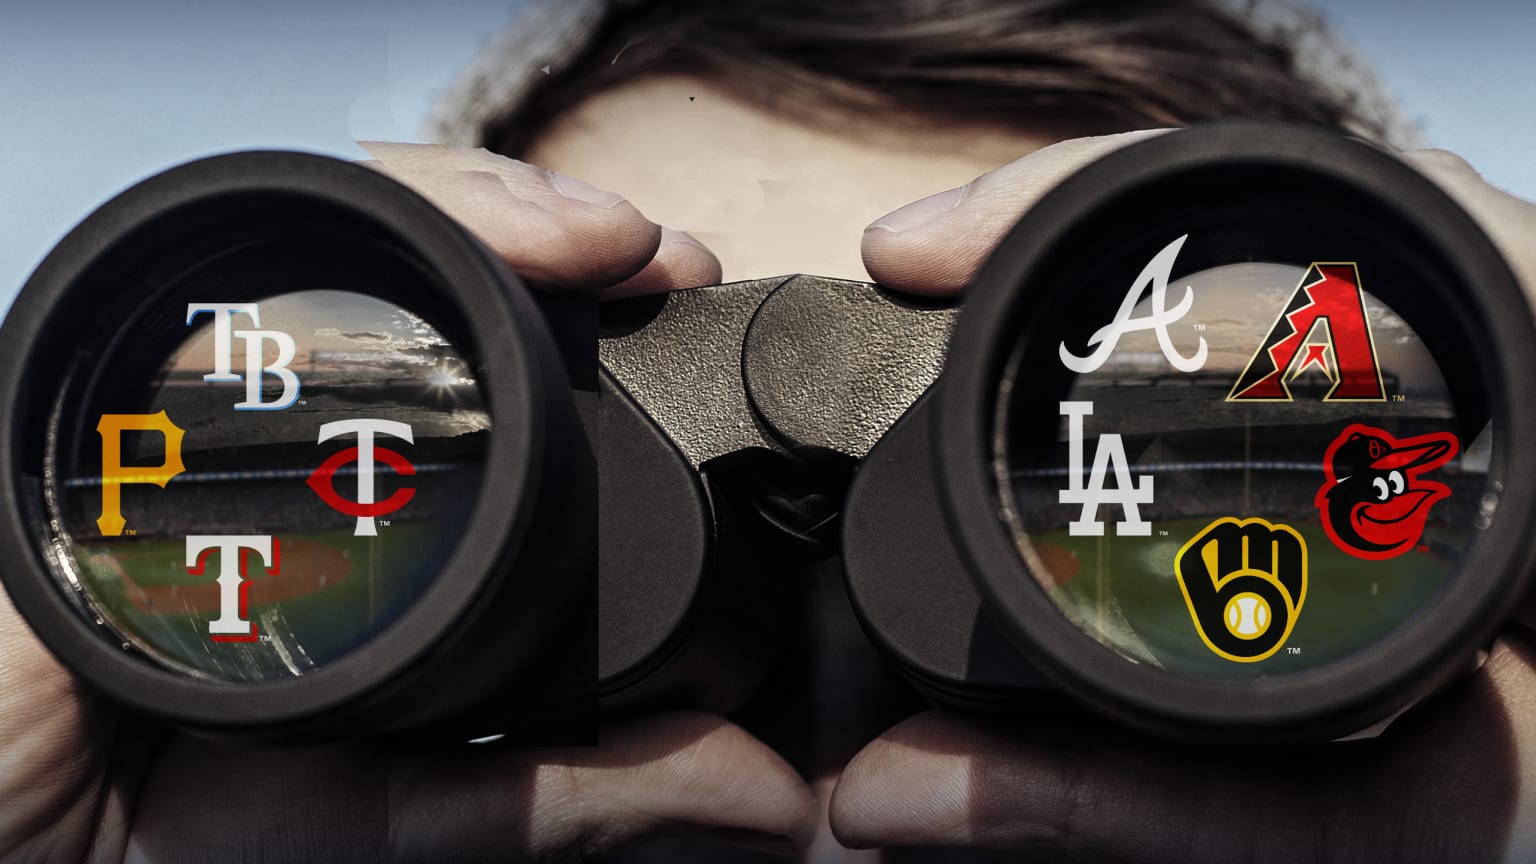 A person looking through binoculars with logos of 9 teams on the lenses